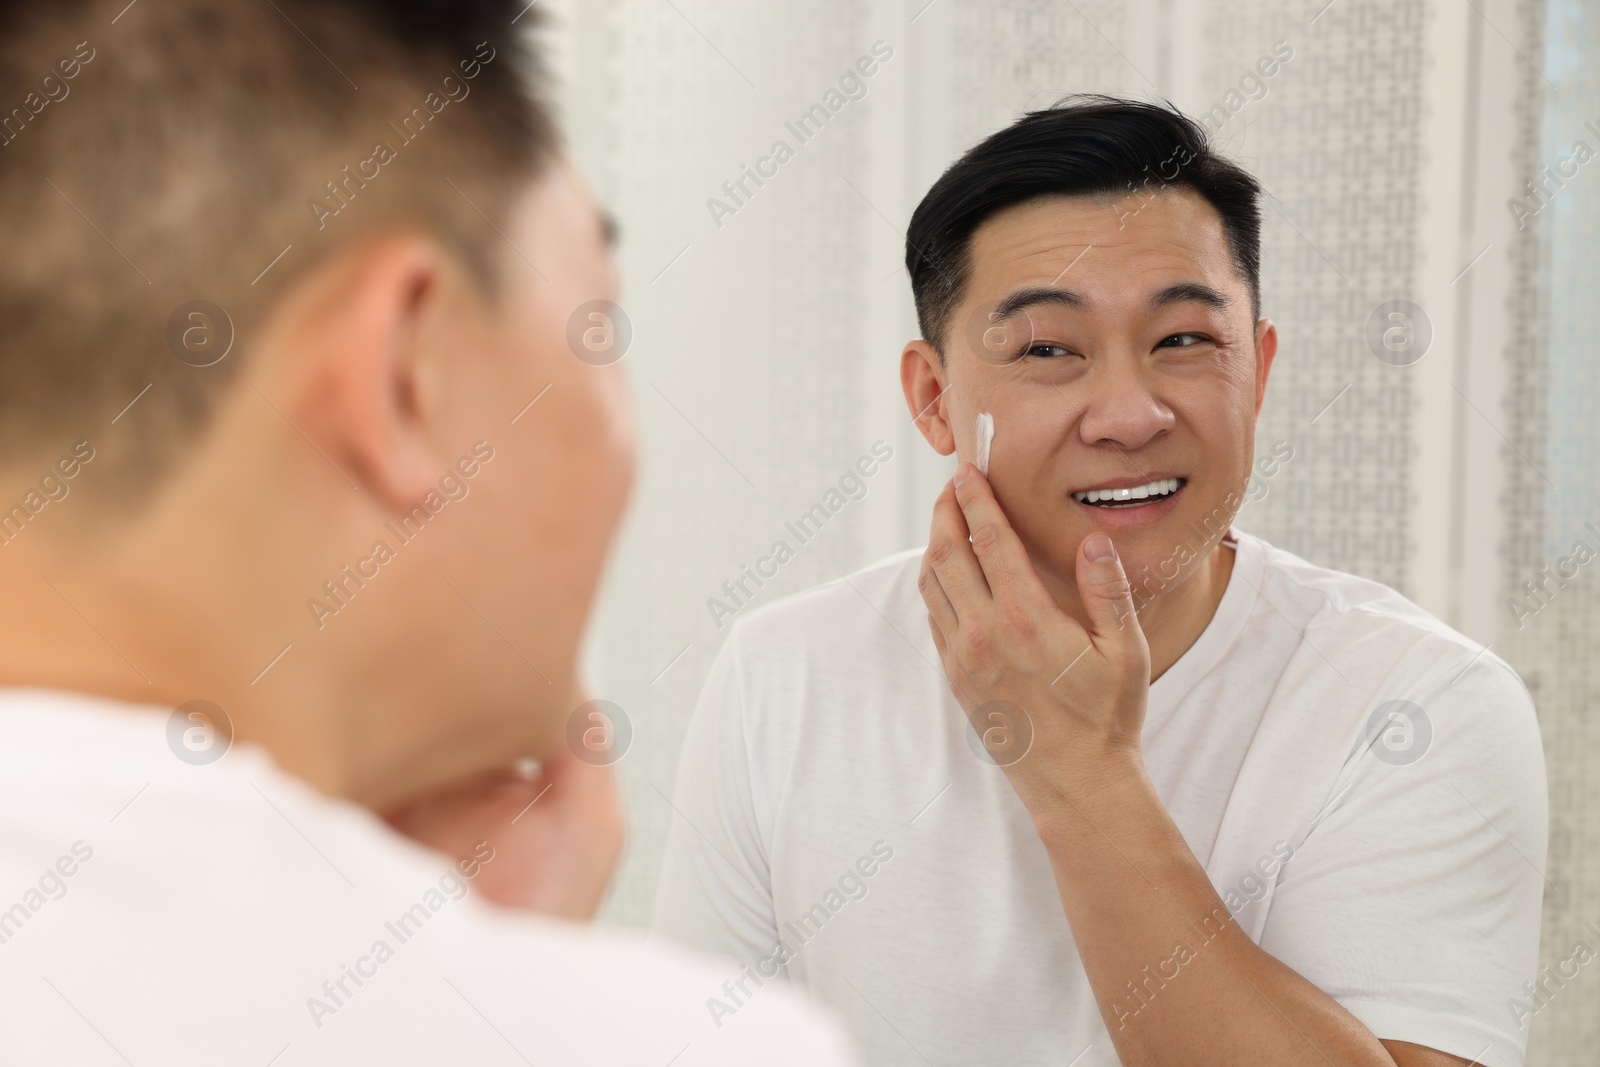 Photo of Handsome man applying cream onto his face near mirror indoors